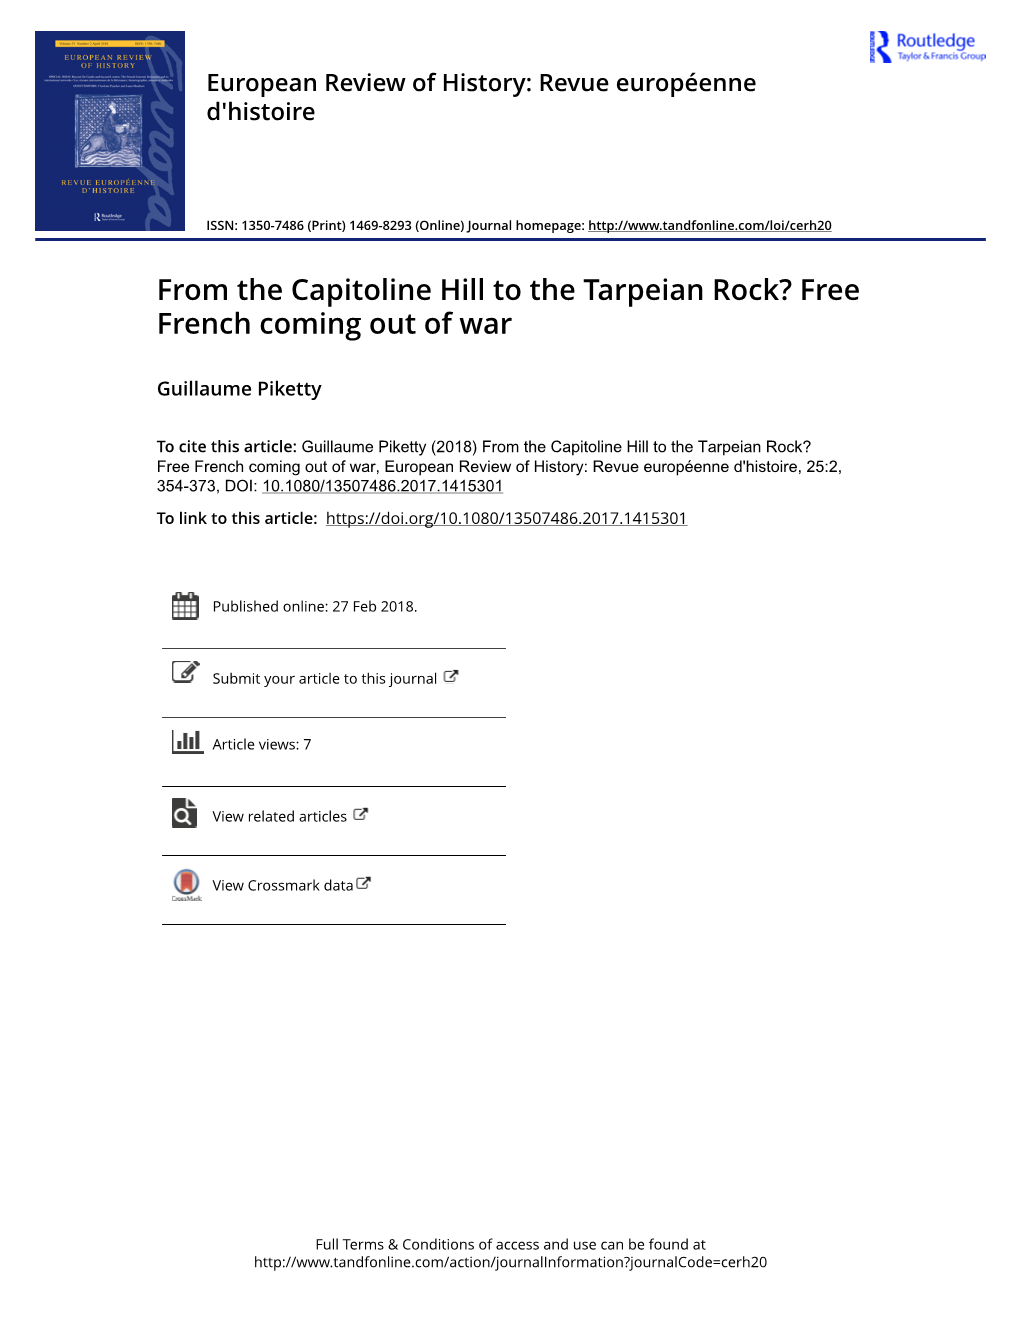 From the Capitoline Hill to the Tarpeian Rock? Free French Coming out of War